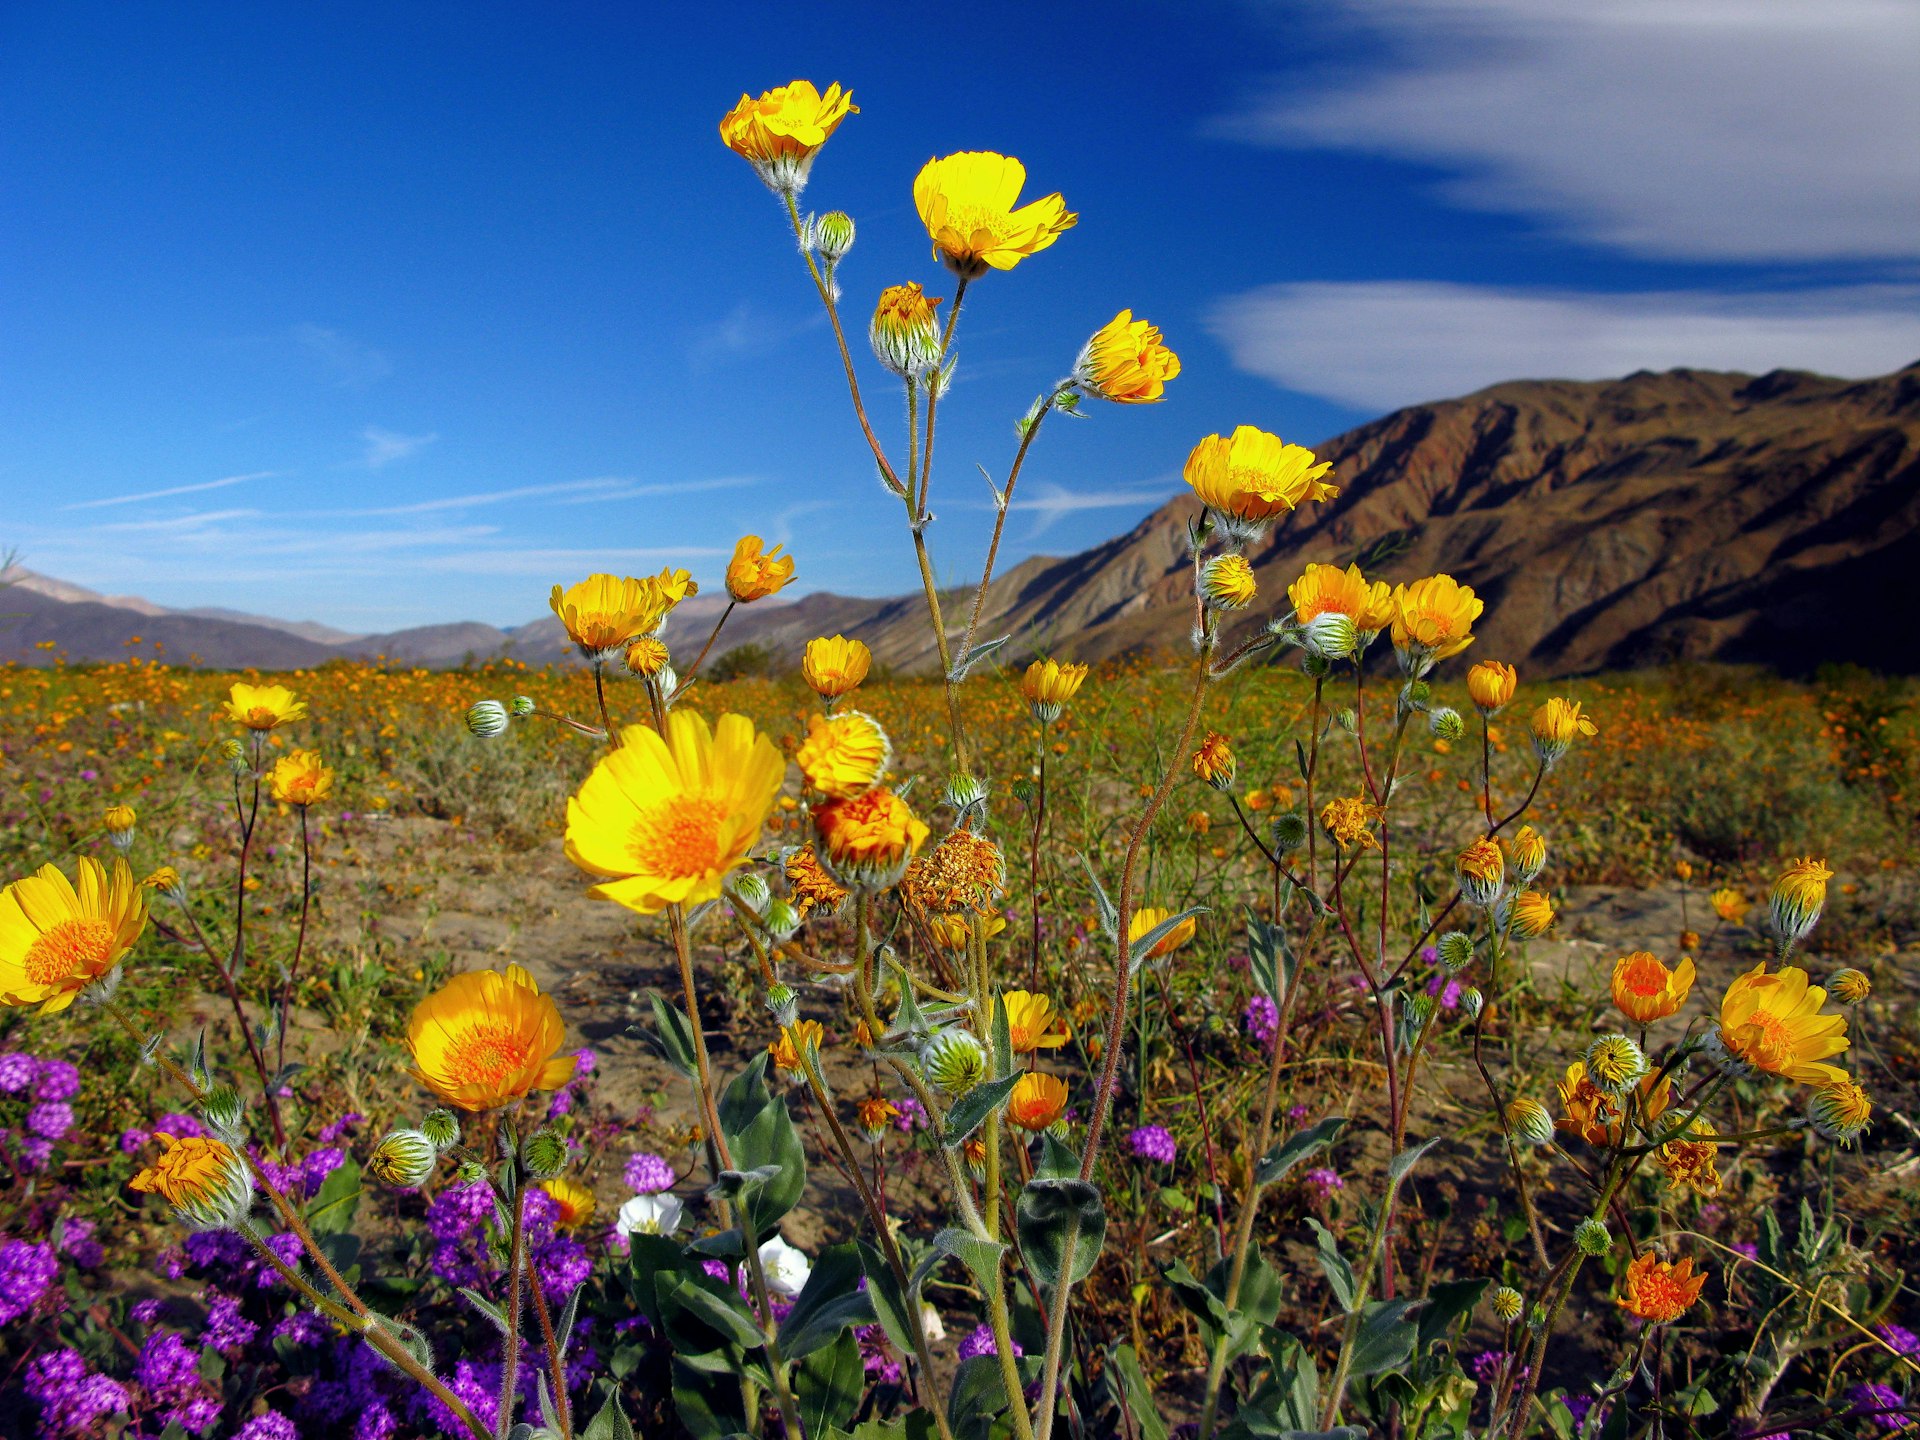 Vibrantly colored flowers are not what you expect from a desert, but with Anza-Borrego's spring rain come a multitude of flowers © Sam Antonio Photography / Getty Images